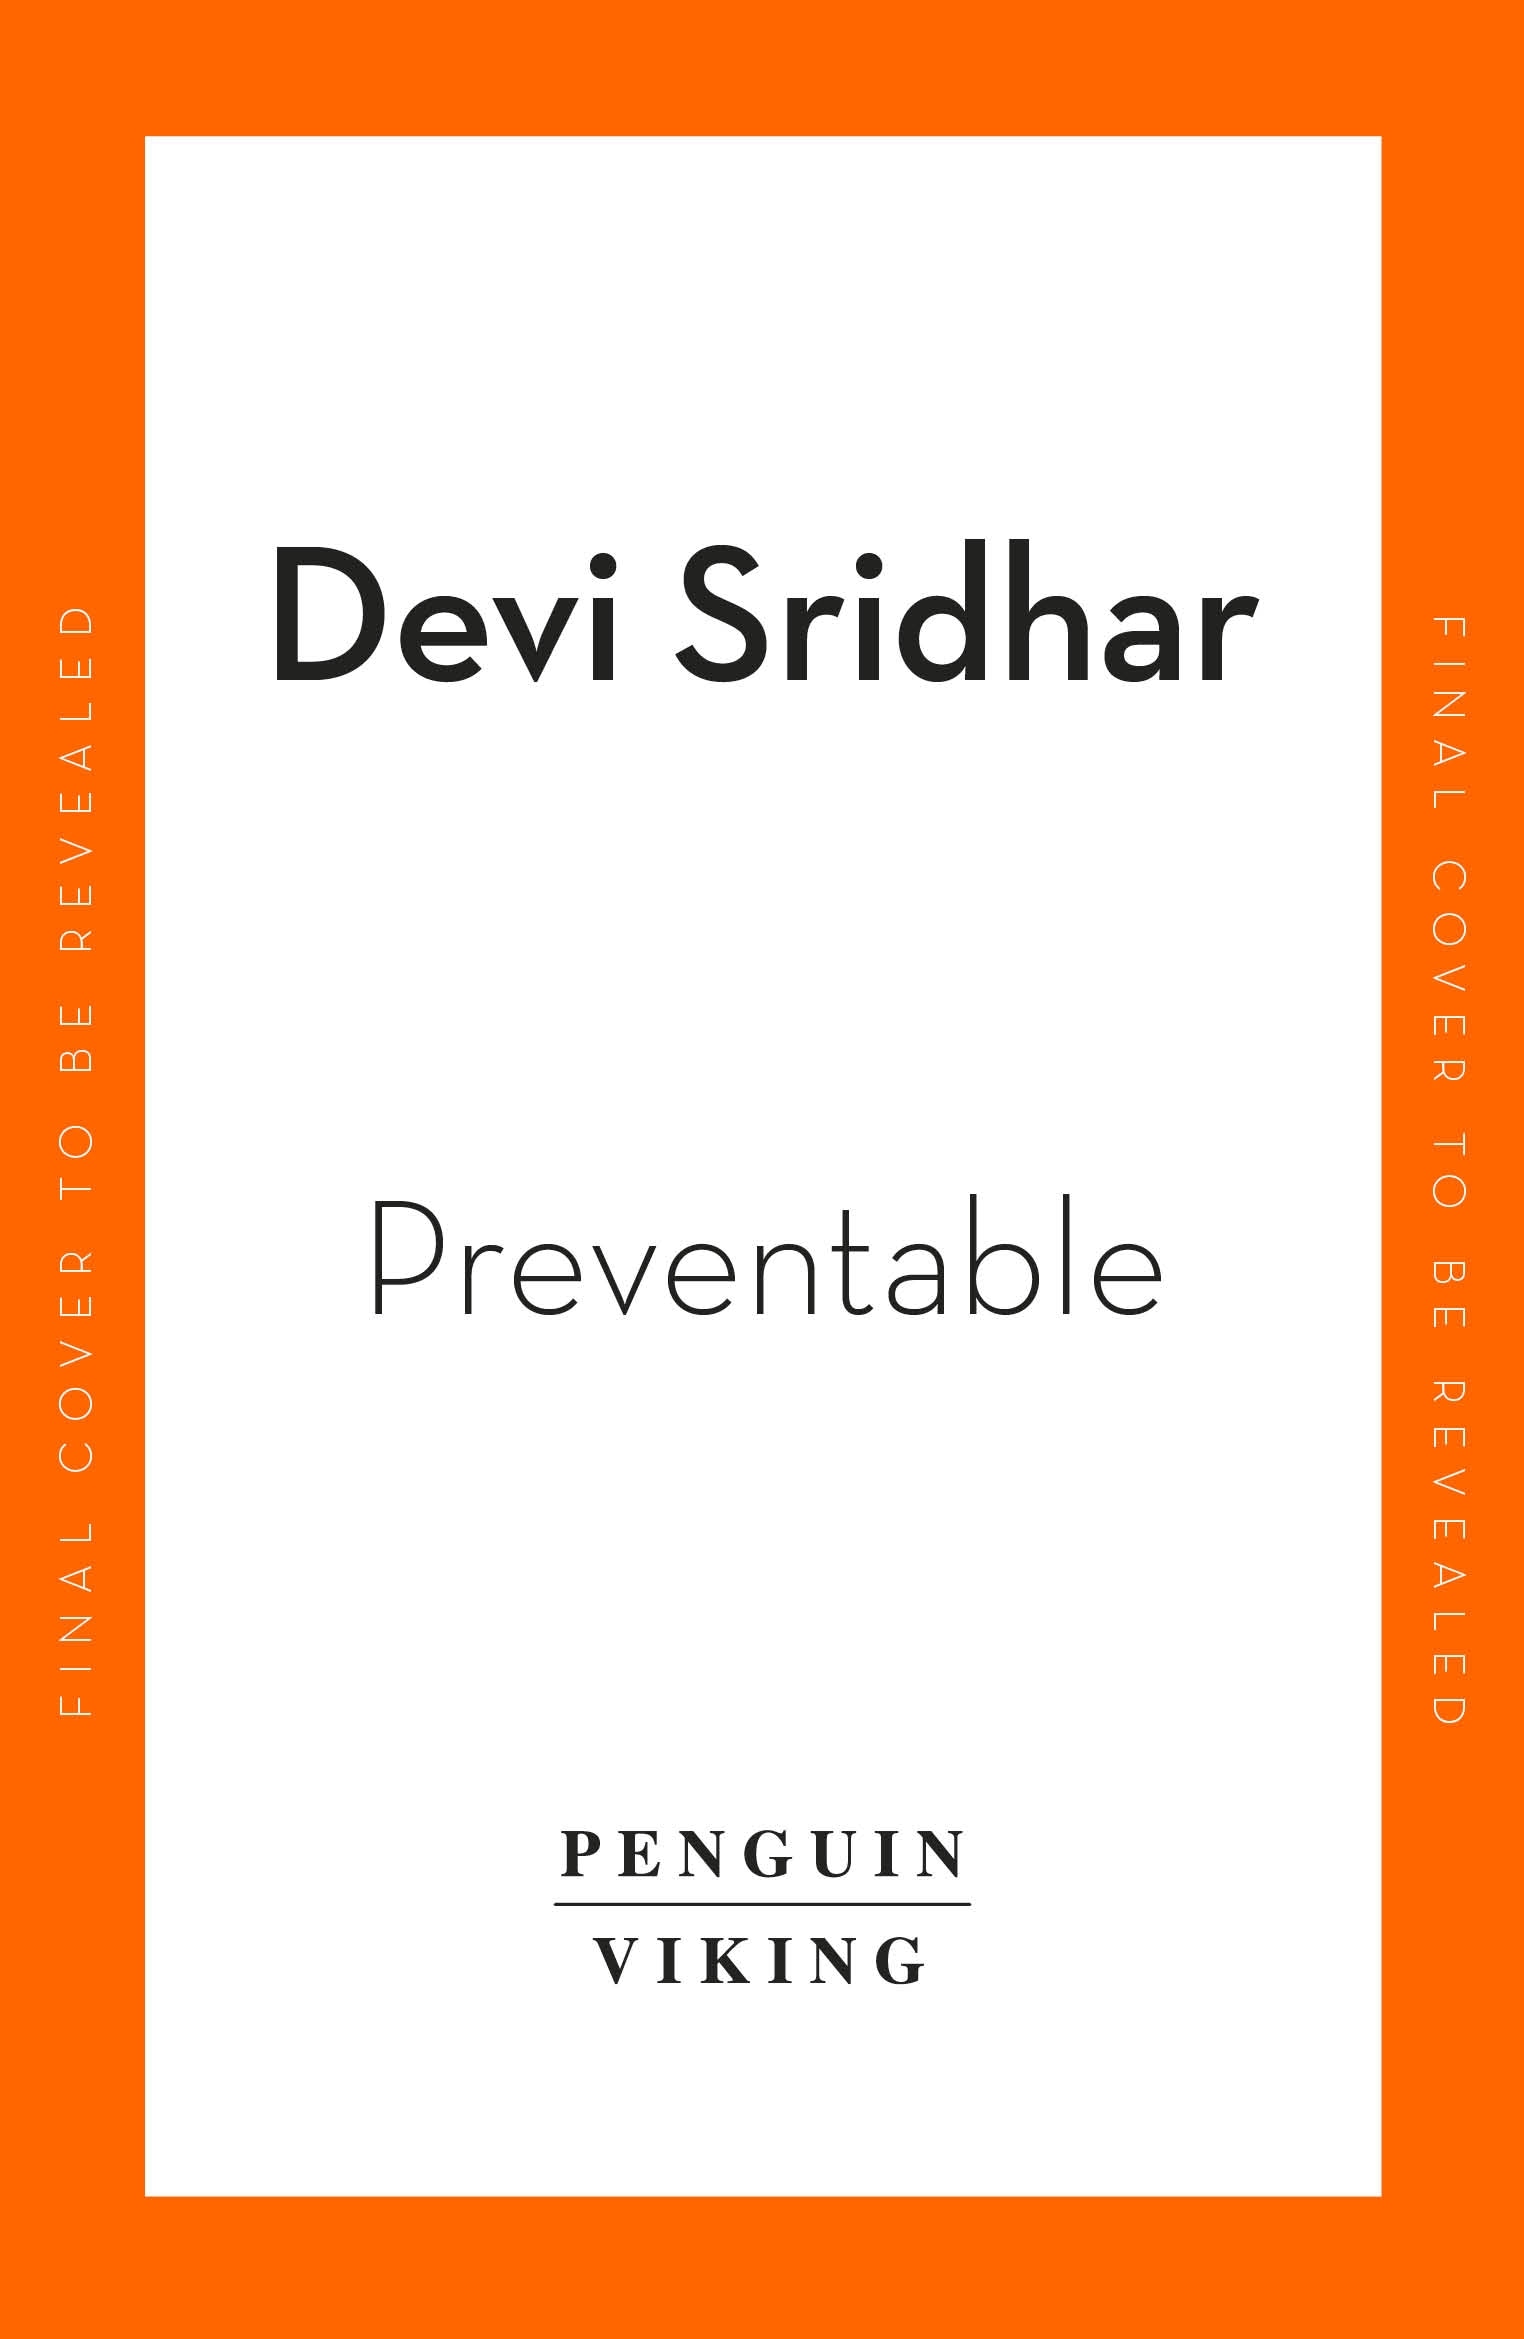 Book “Preventable” by Devi Sridhar — May 5, 2022